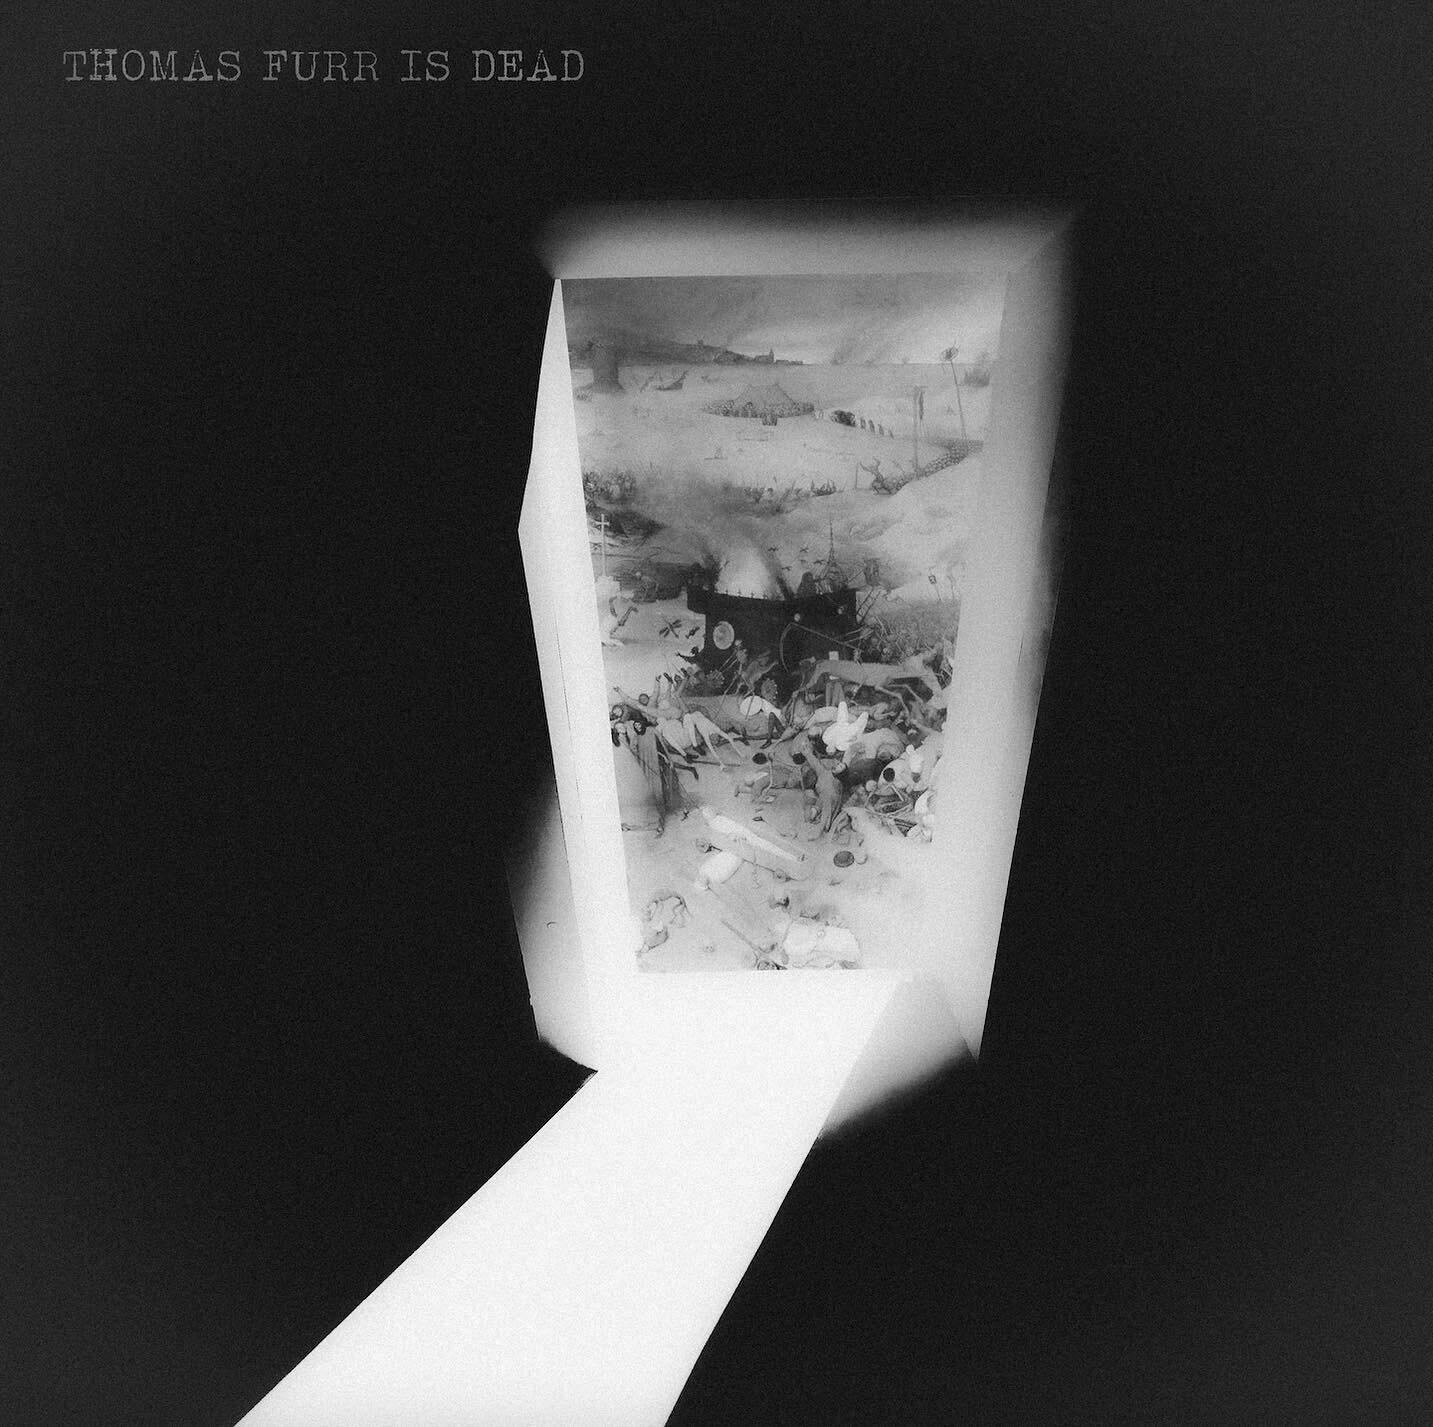 THOMAS FURR IS DEAD ☠️ 
///
Lo-fi bedroom folk-emo 
///
9 tracks for your ancient dread
///
Performed, memorized yet never written. These songs all loved for a short season of life and were only ever briefly captured here. Available now on all stream